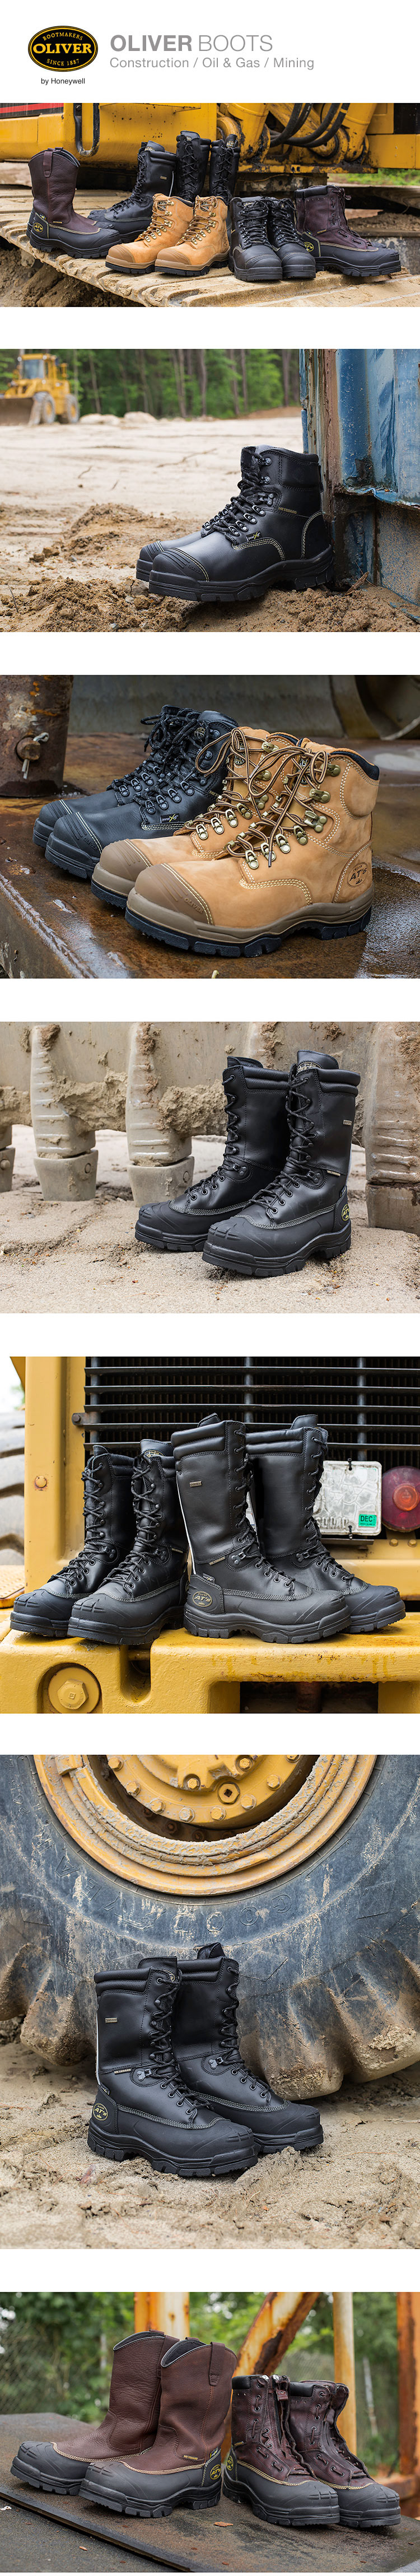 industrial footwear Product Photography boots safety muck oliver kings NEOS servus ranger construction OIL AND GAS Mining